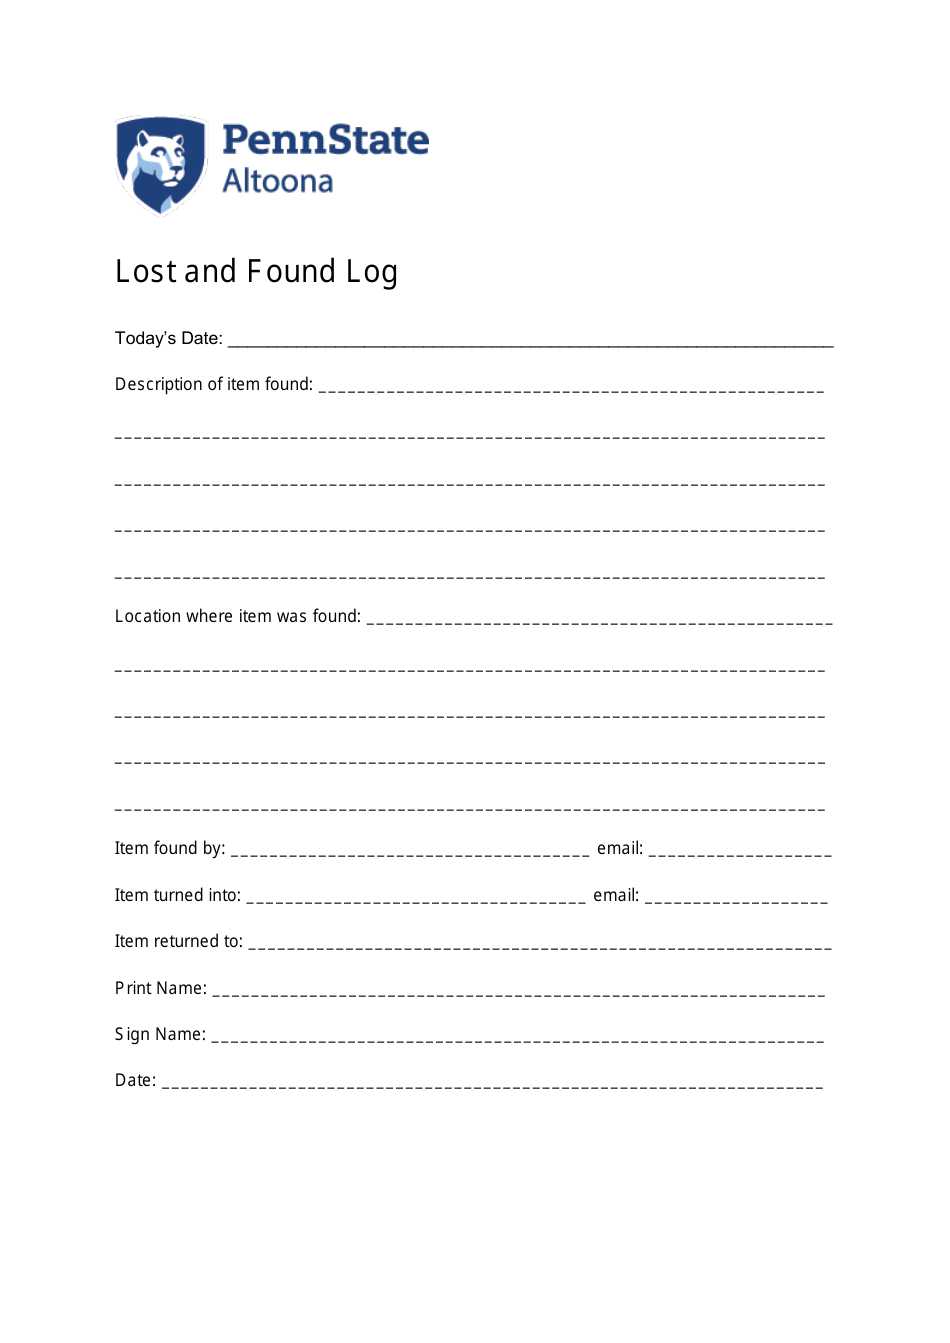 lost-and-found-log-template-pennstate-altoona-download-printable-pdf